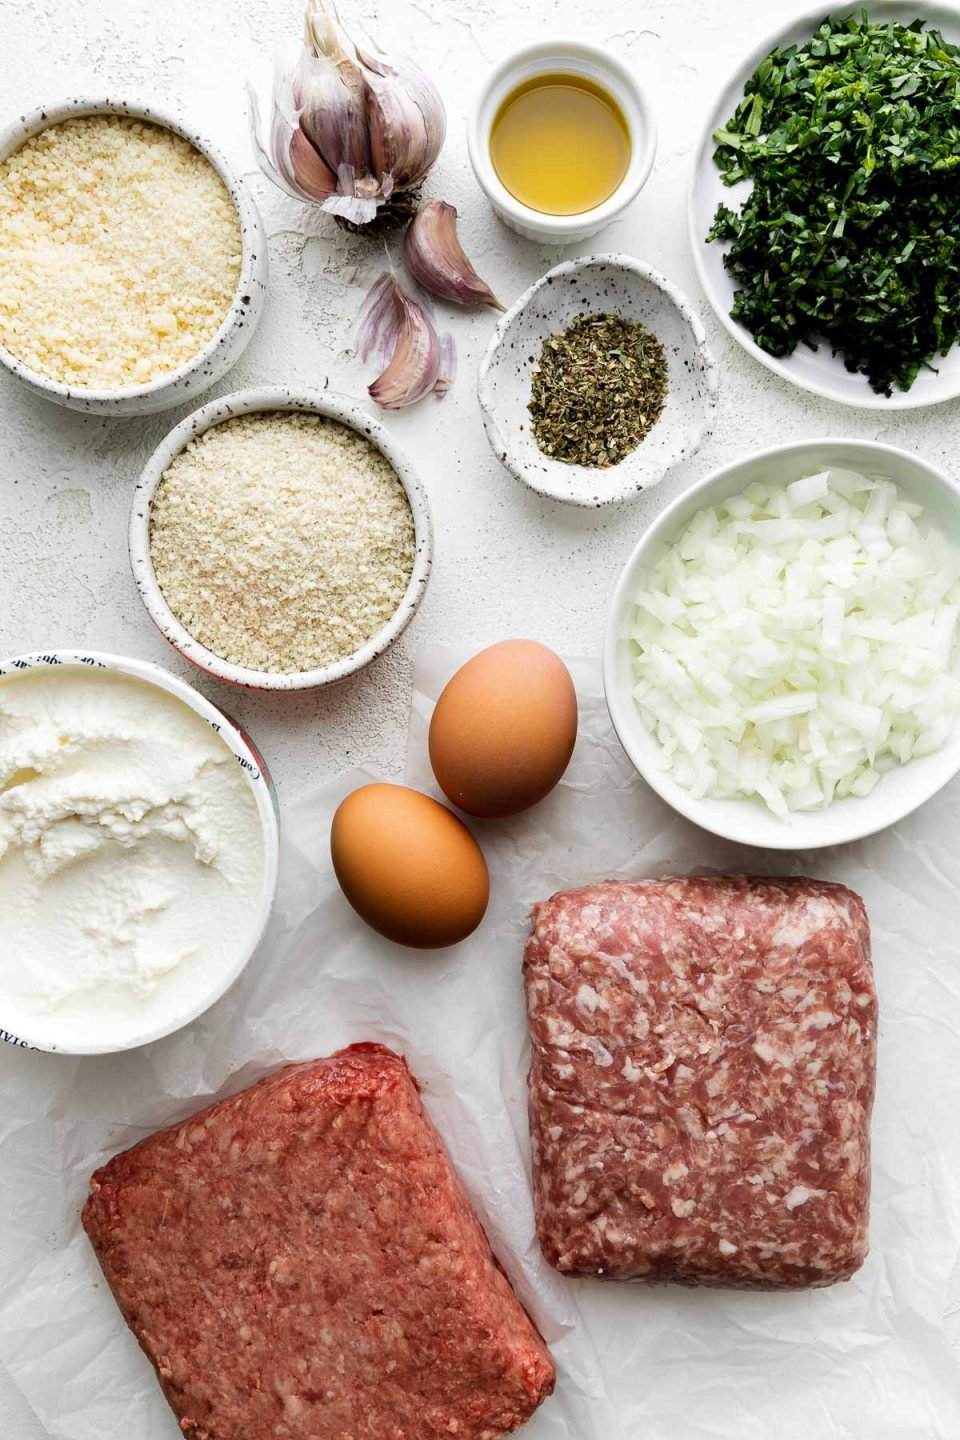 Best-Ever Ricotta Meatballs ingredients arranged on a creamy cement surface - ground beef and pork atop a sheet of crinkled wax paper, olive oil, yellow onion, garlic, whole milk ricotta, panko breadcrumbs, eggs, grated parmesan, fresh parsley, fresh basil, Italian seasoning.